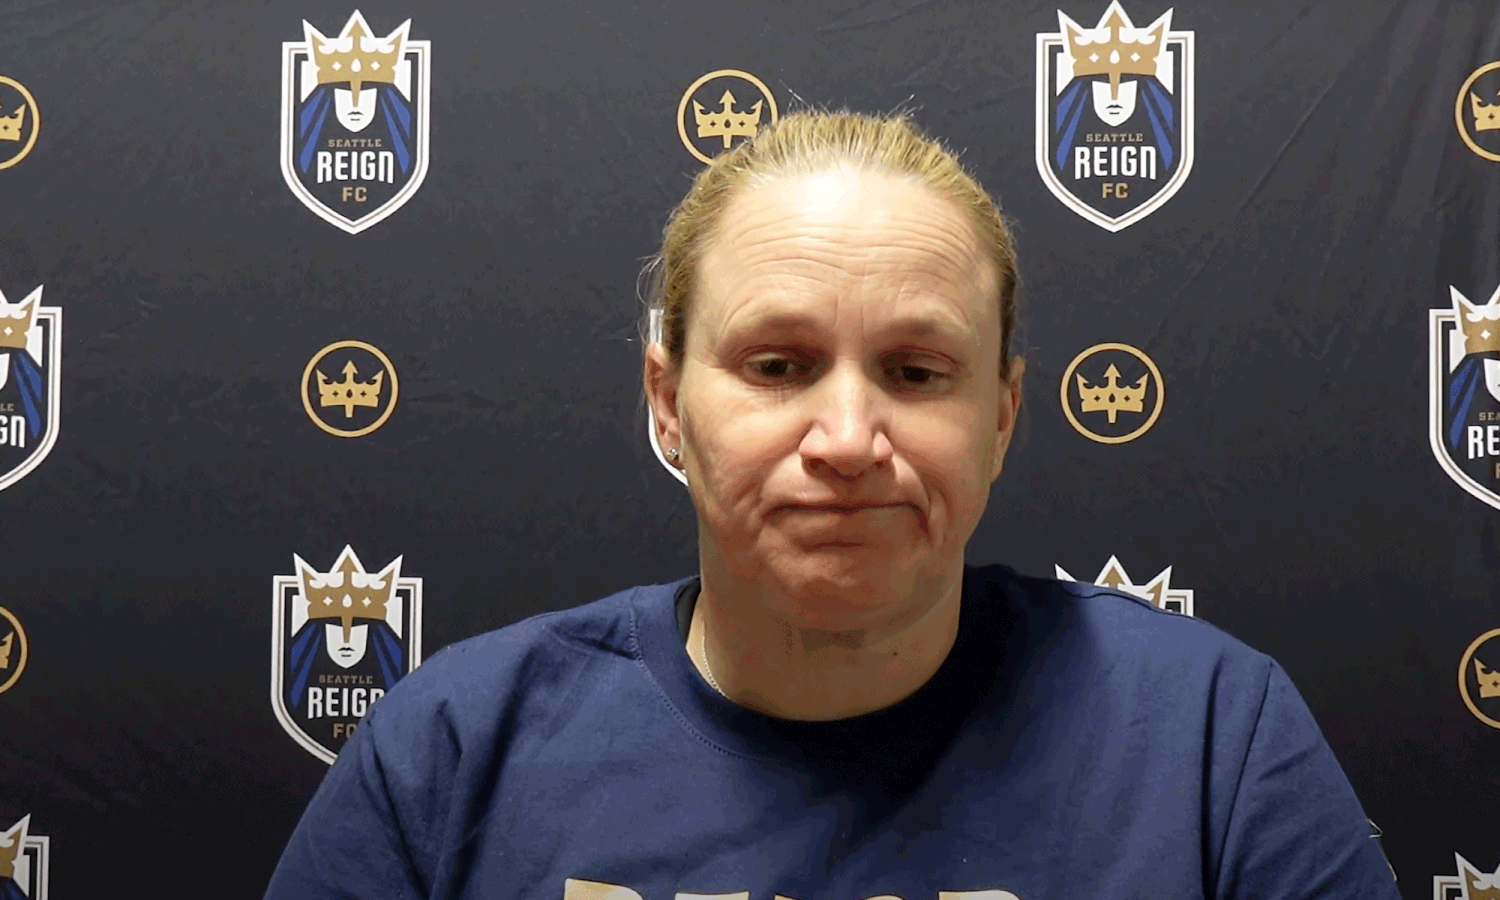 VIDEO | Post-Match Press Conference – Laura Harvey vs. Chicago Red Stars